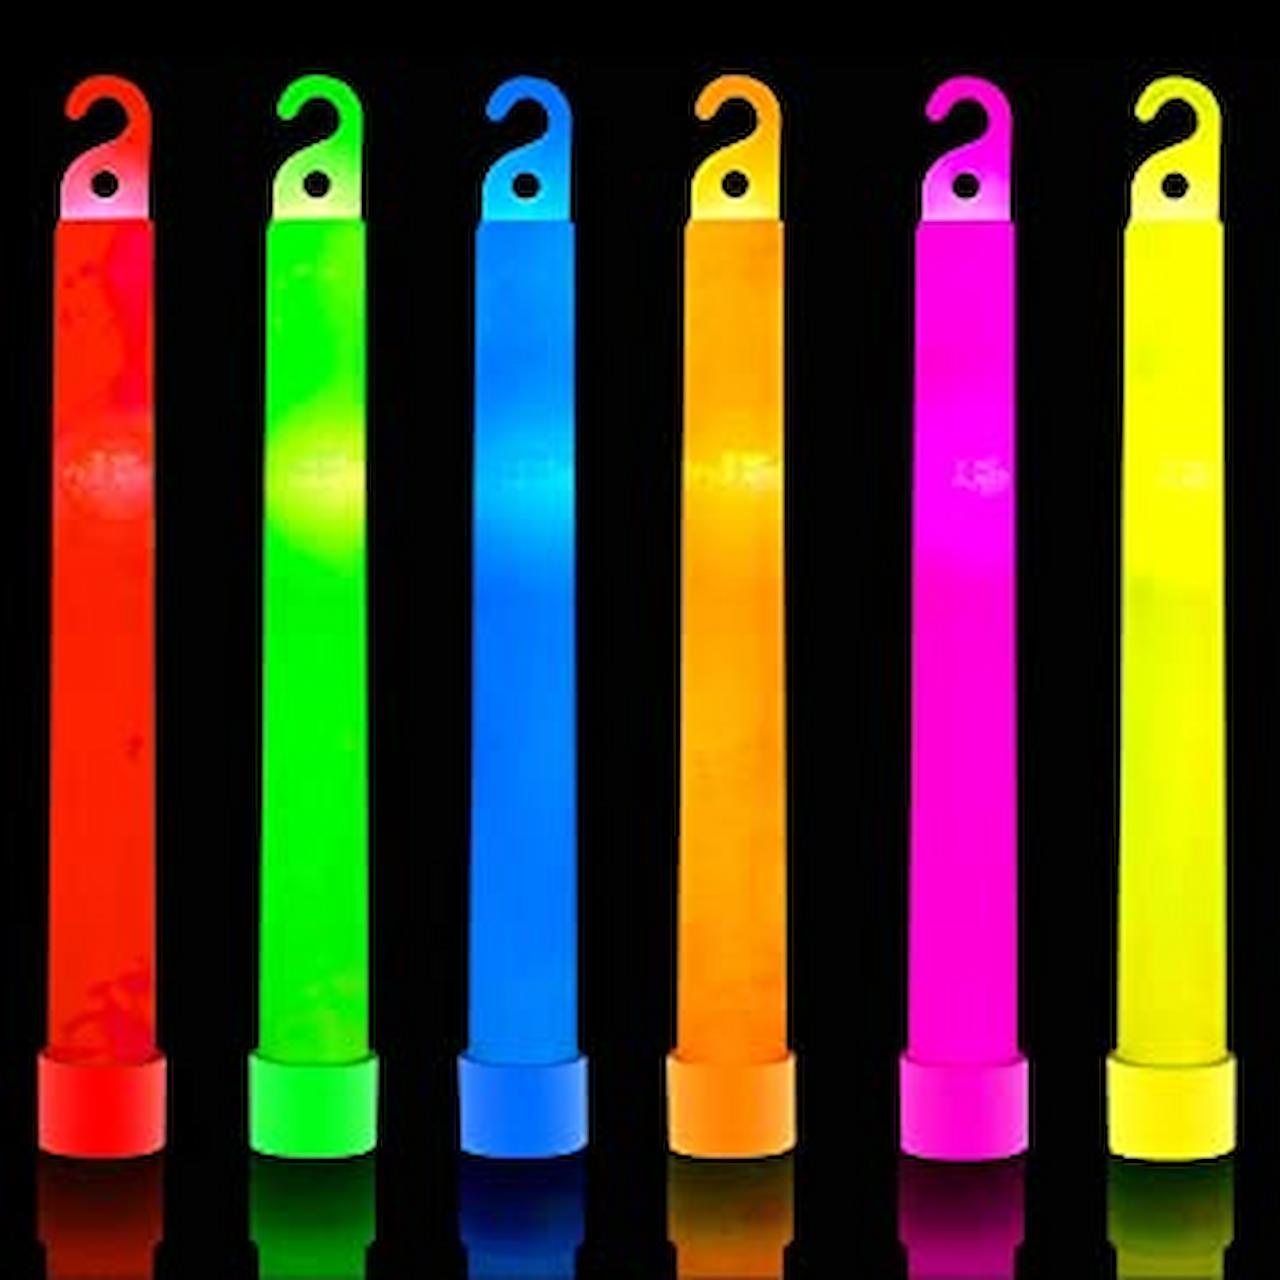 Have Fun, And Get Noticed With Glow Sticks Available Online At Www.Glowbrothers.Co.Uk